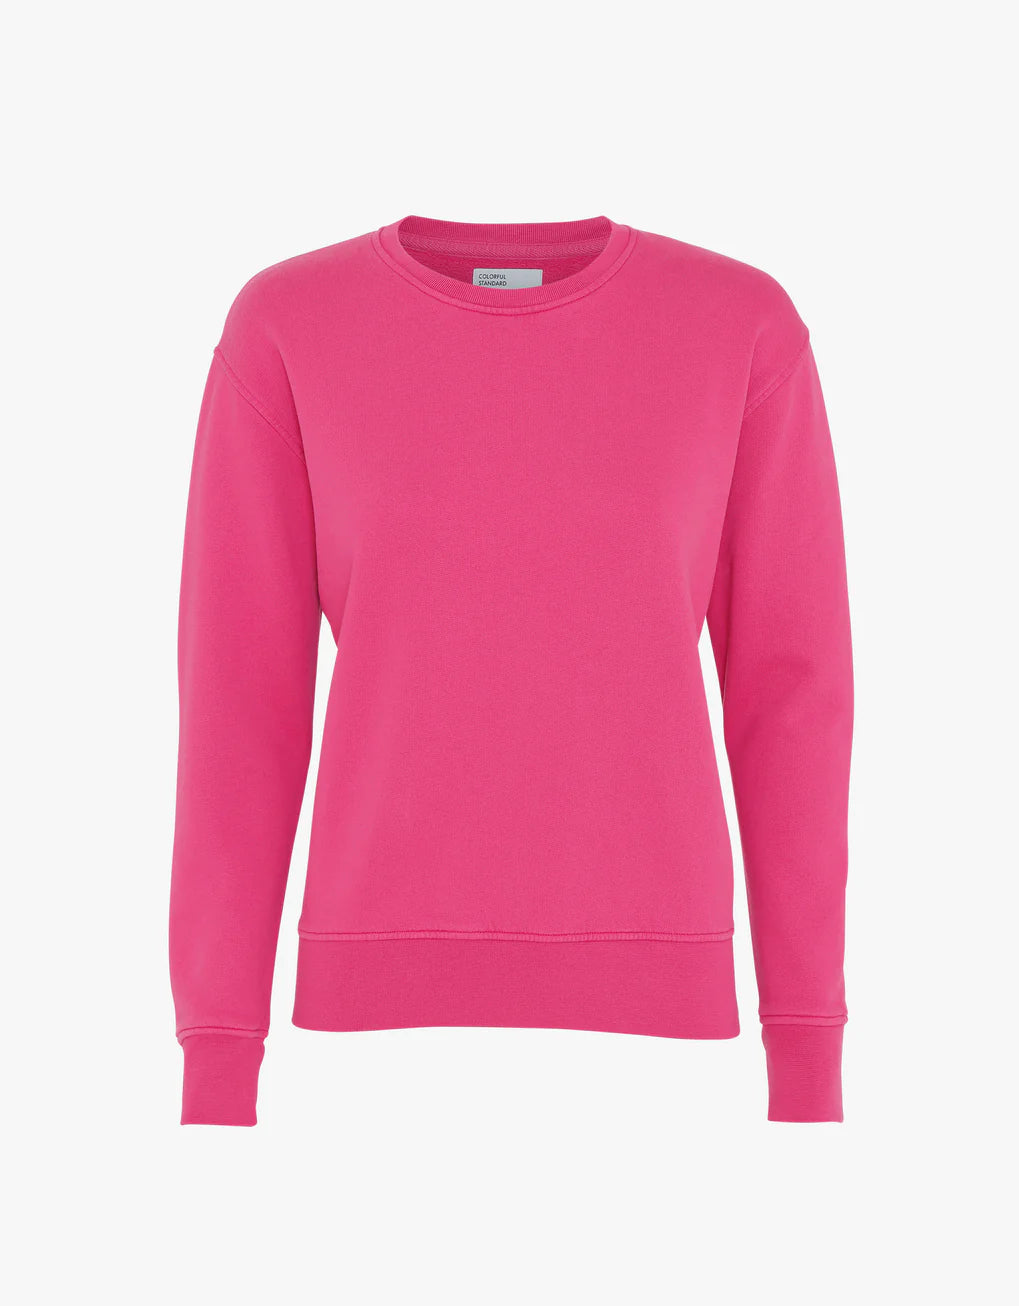 A women's pink Classic Organic Crew sweatshirt by Colorful Standard, made of organic cotton on a white background, machine washable.